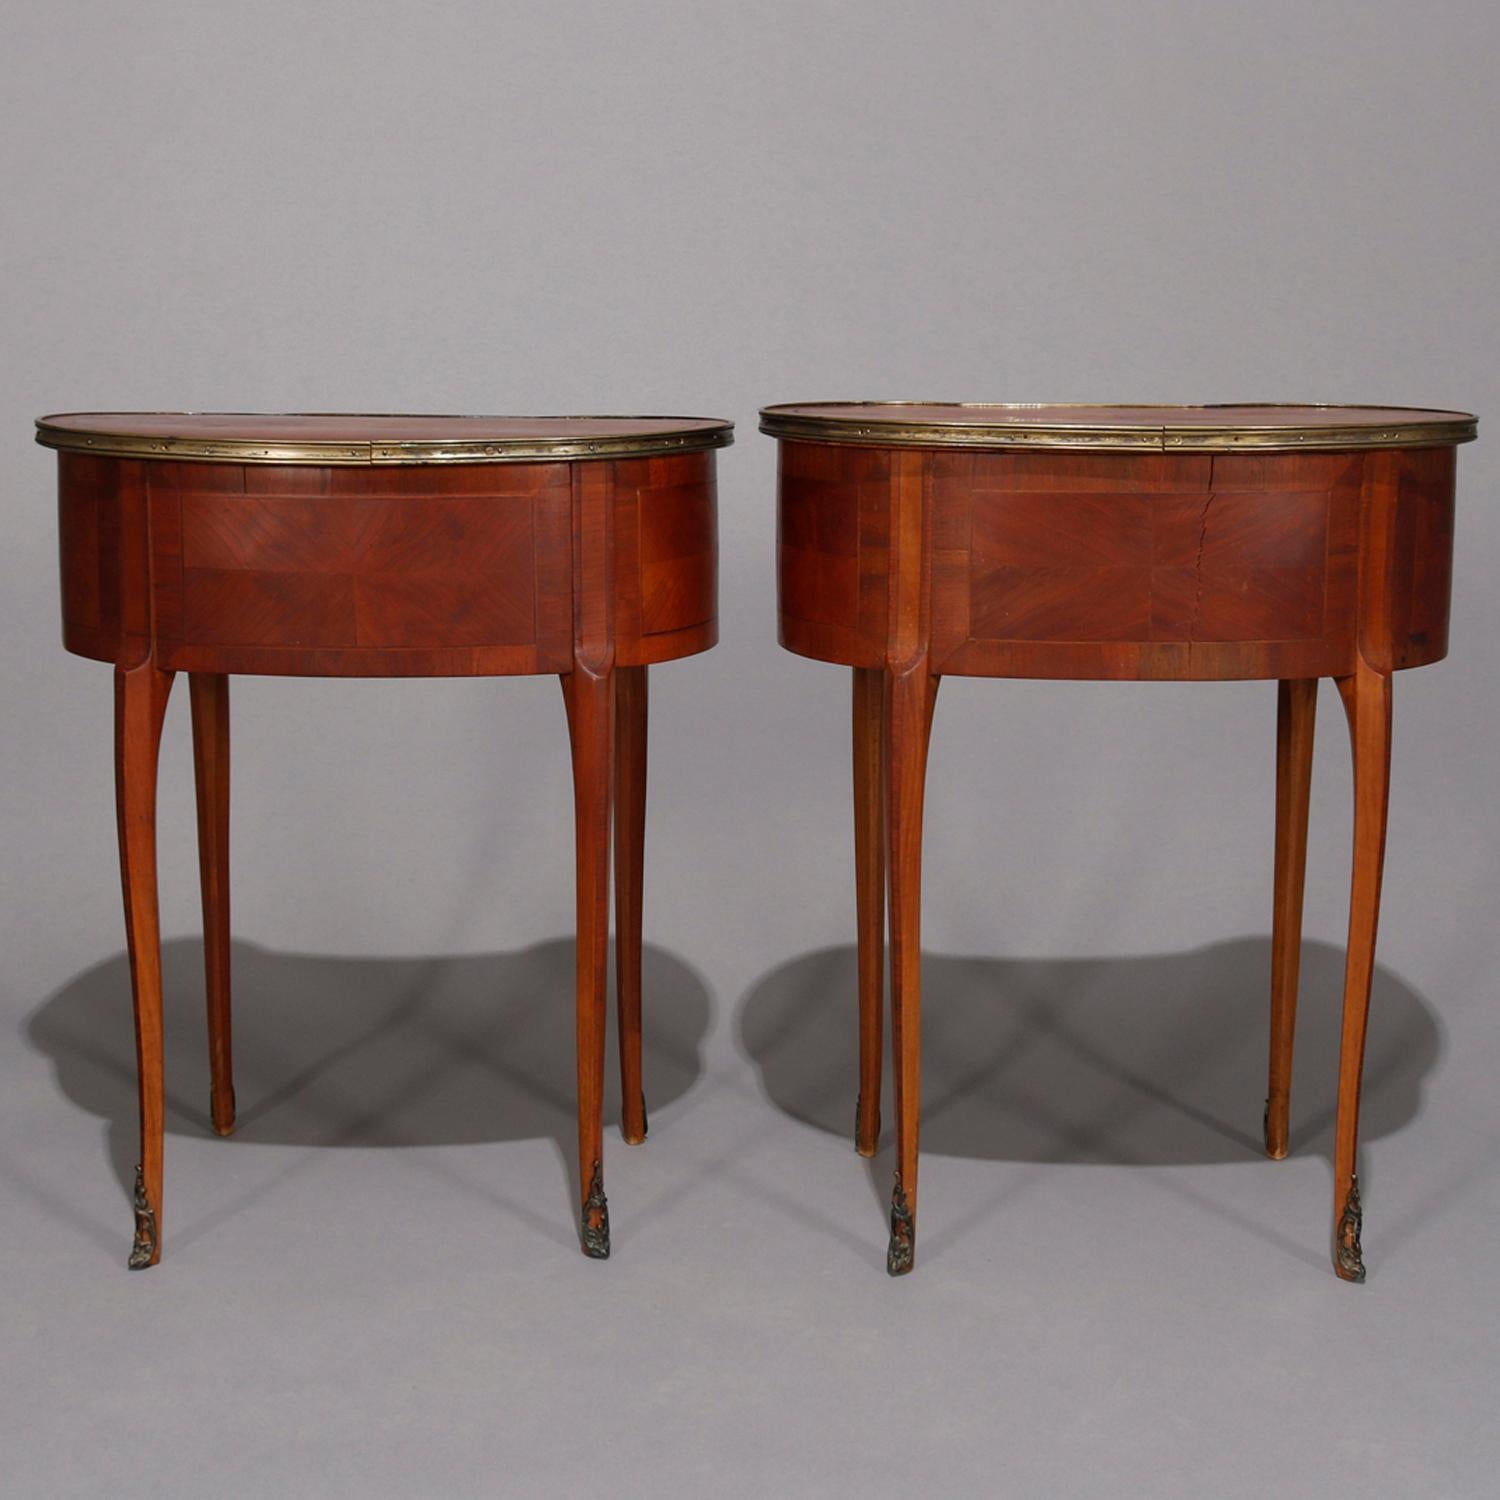 Cast Pair of French Louis XV Kingwood & Ormolu Kidney Shaped Side Tables, circa 1920